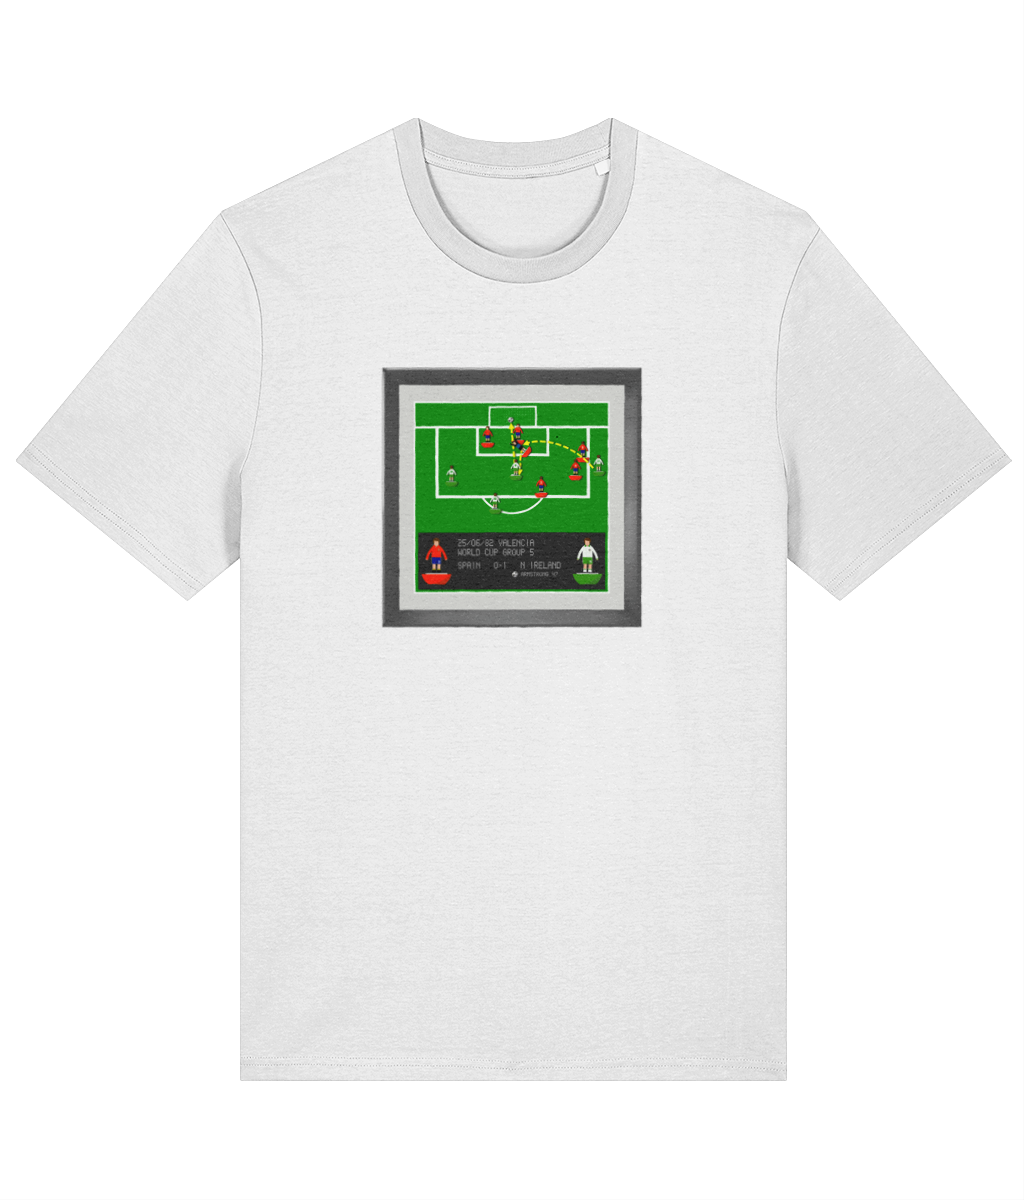 Football Iconic Moments 'Armstrong - NORTHERN IRELAND v Spain 1982' Unisex T-Shirt